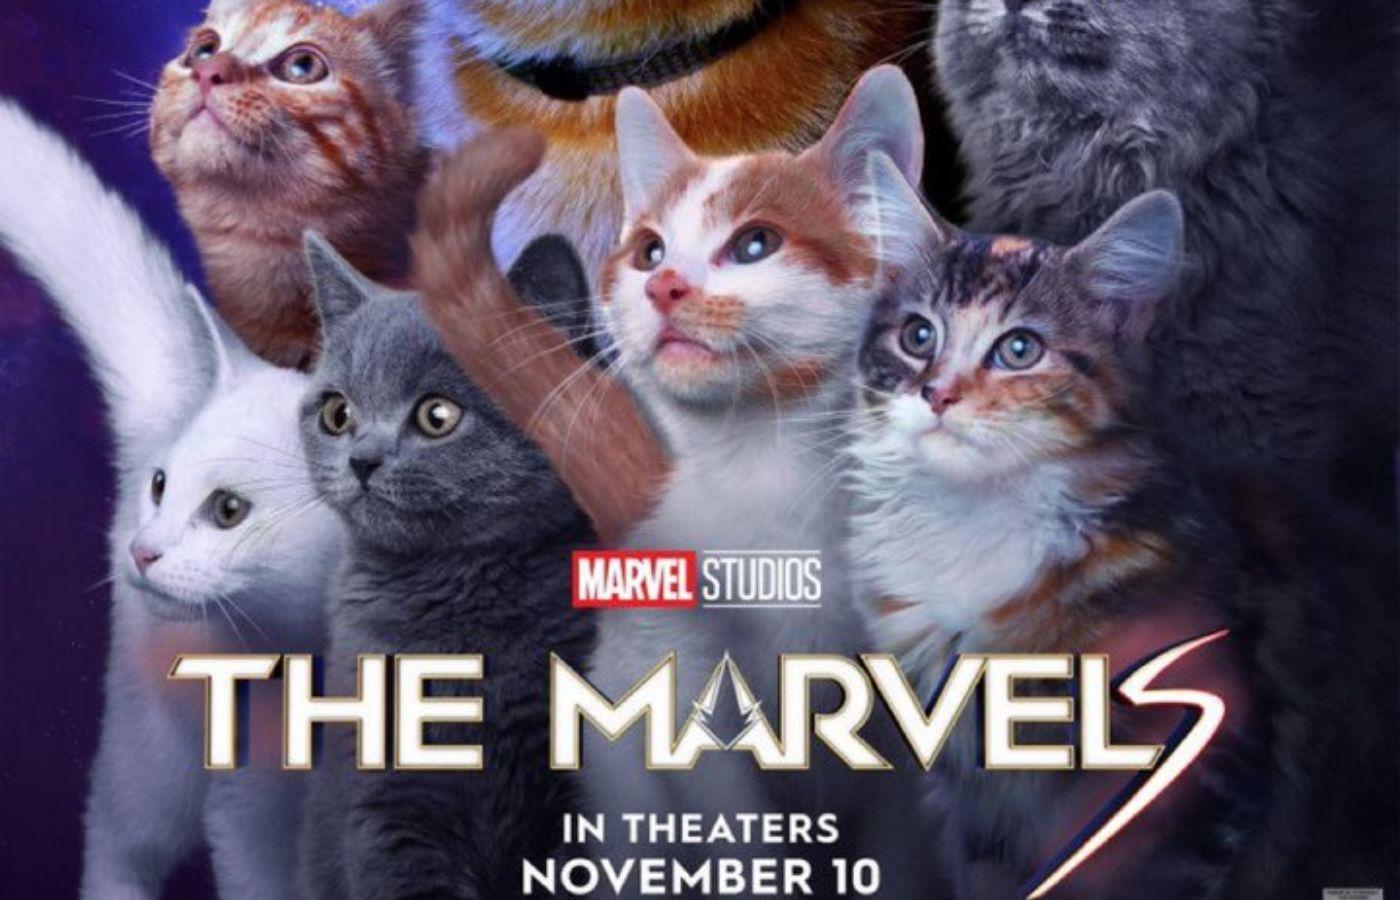 The Marvels Movie Reviews: Critics Share First Reactions